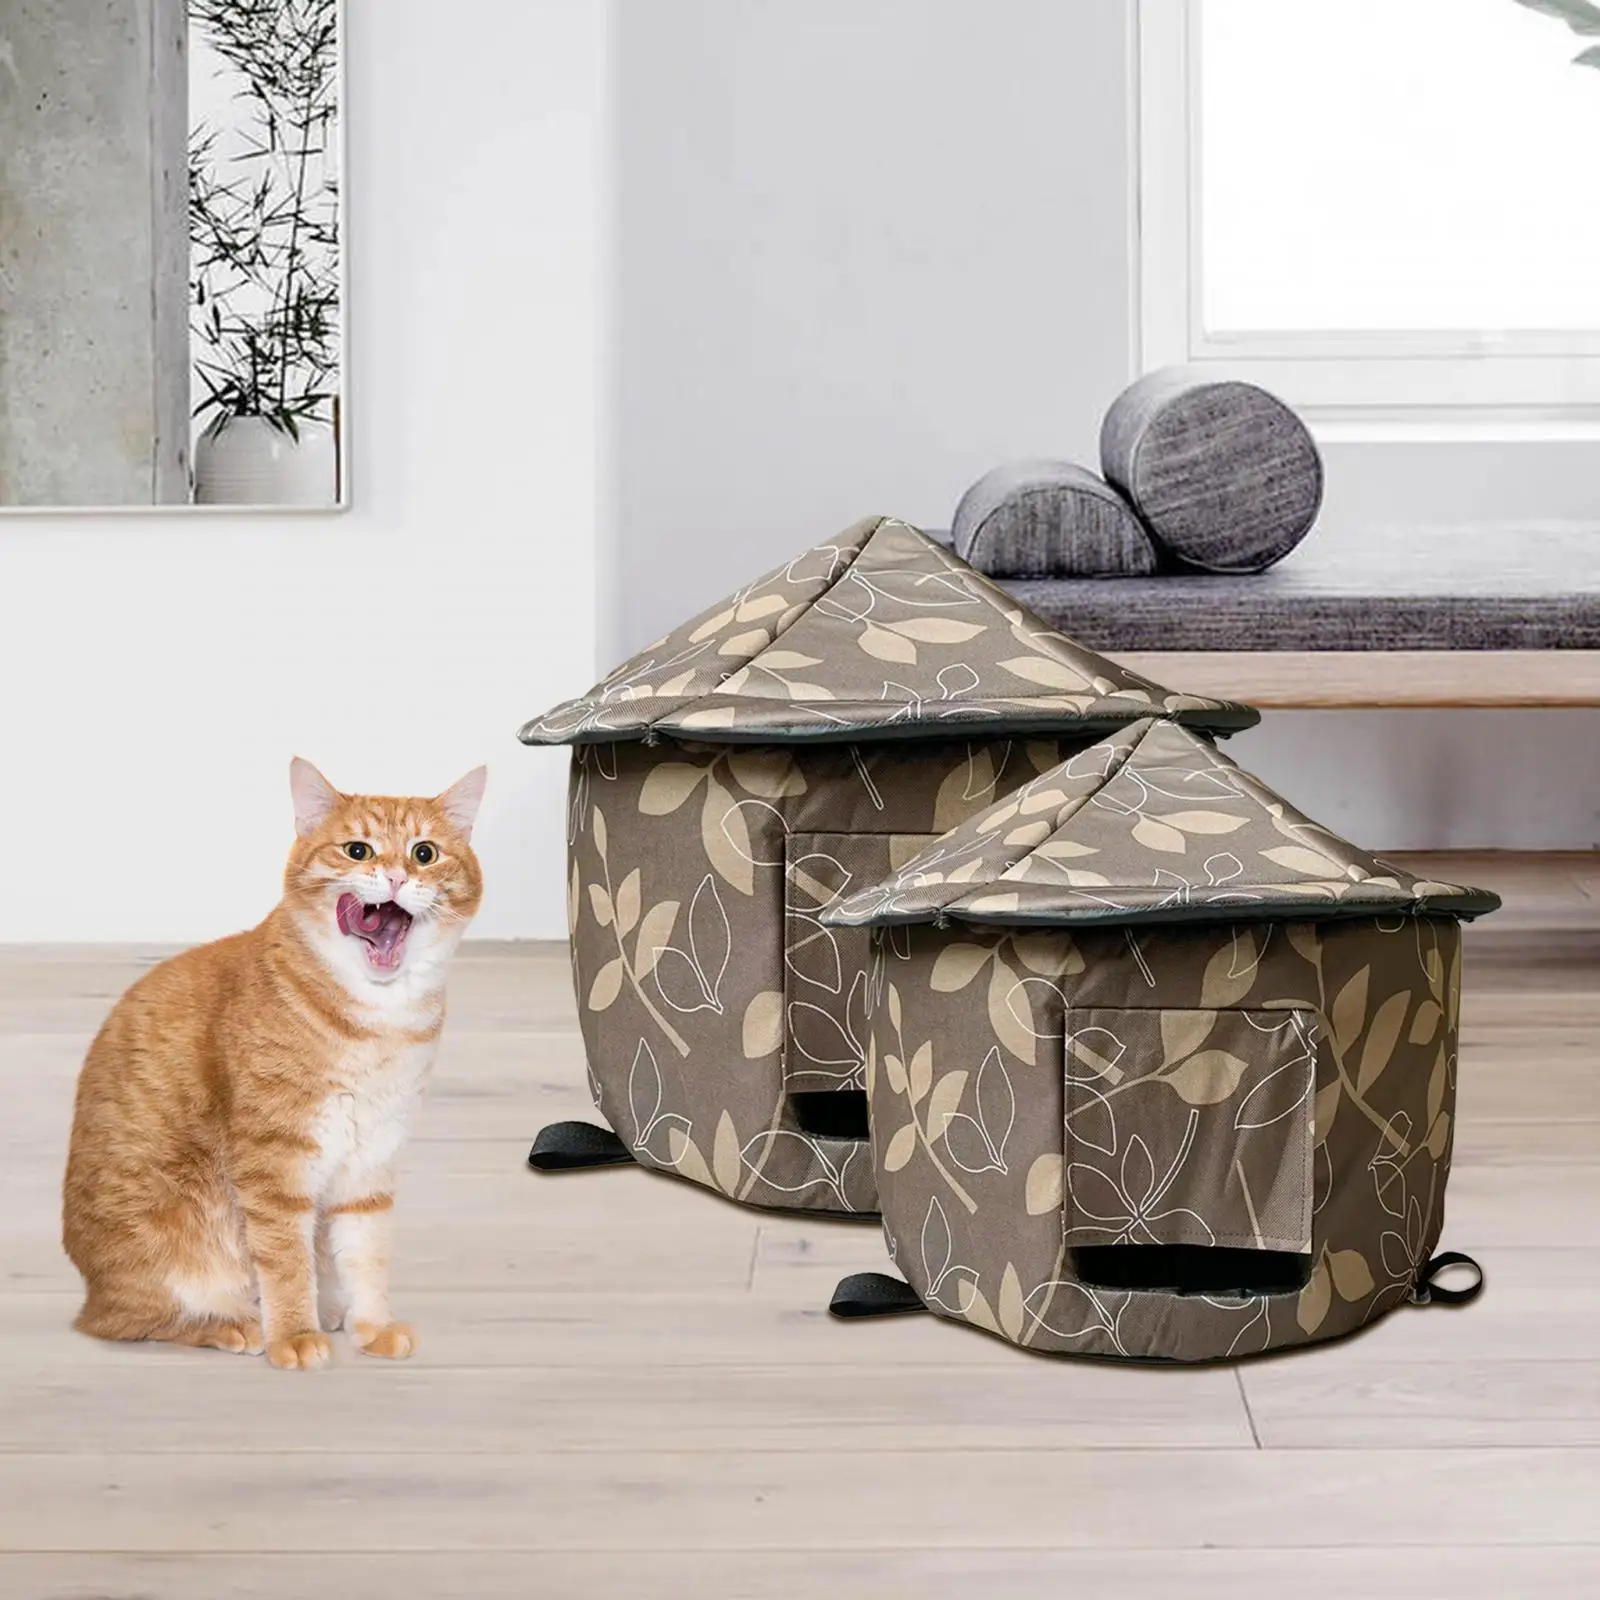 Stray Cats Shelter Anti Slip Foldable Outdoor Cat House for Cat Puppy